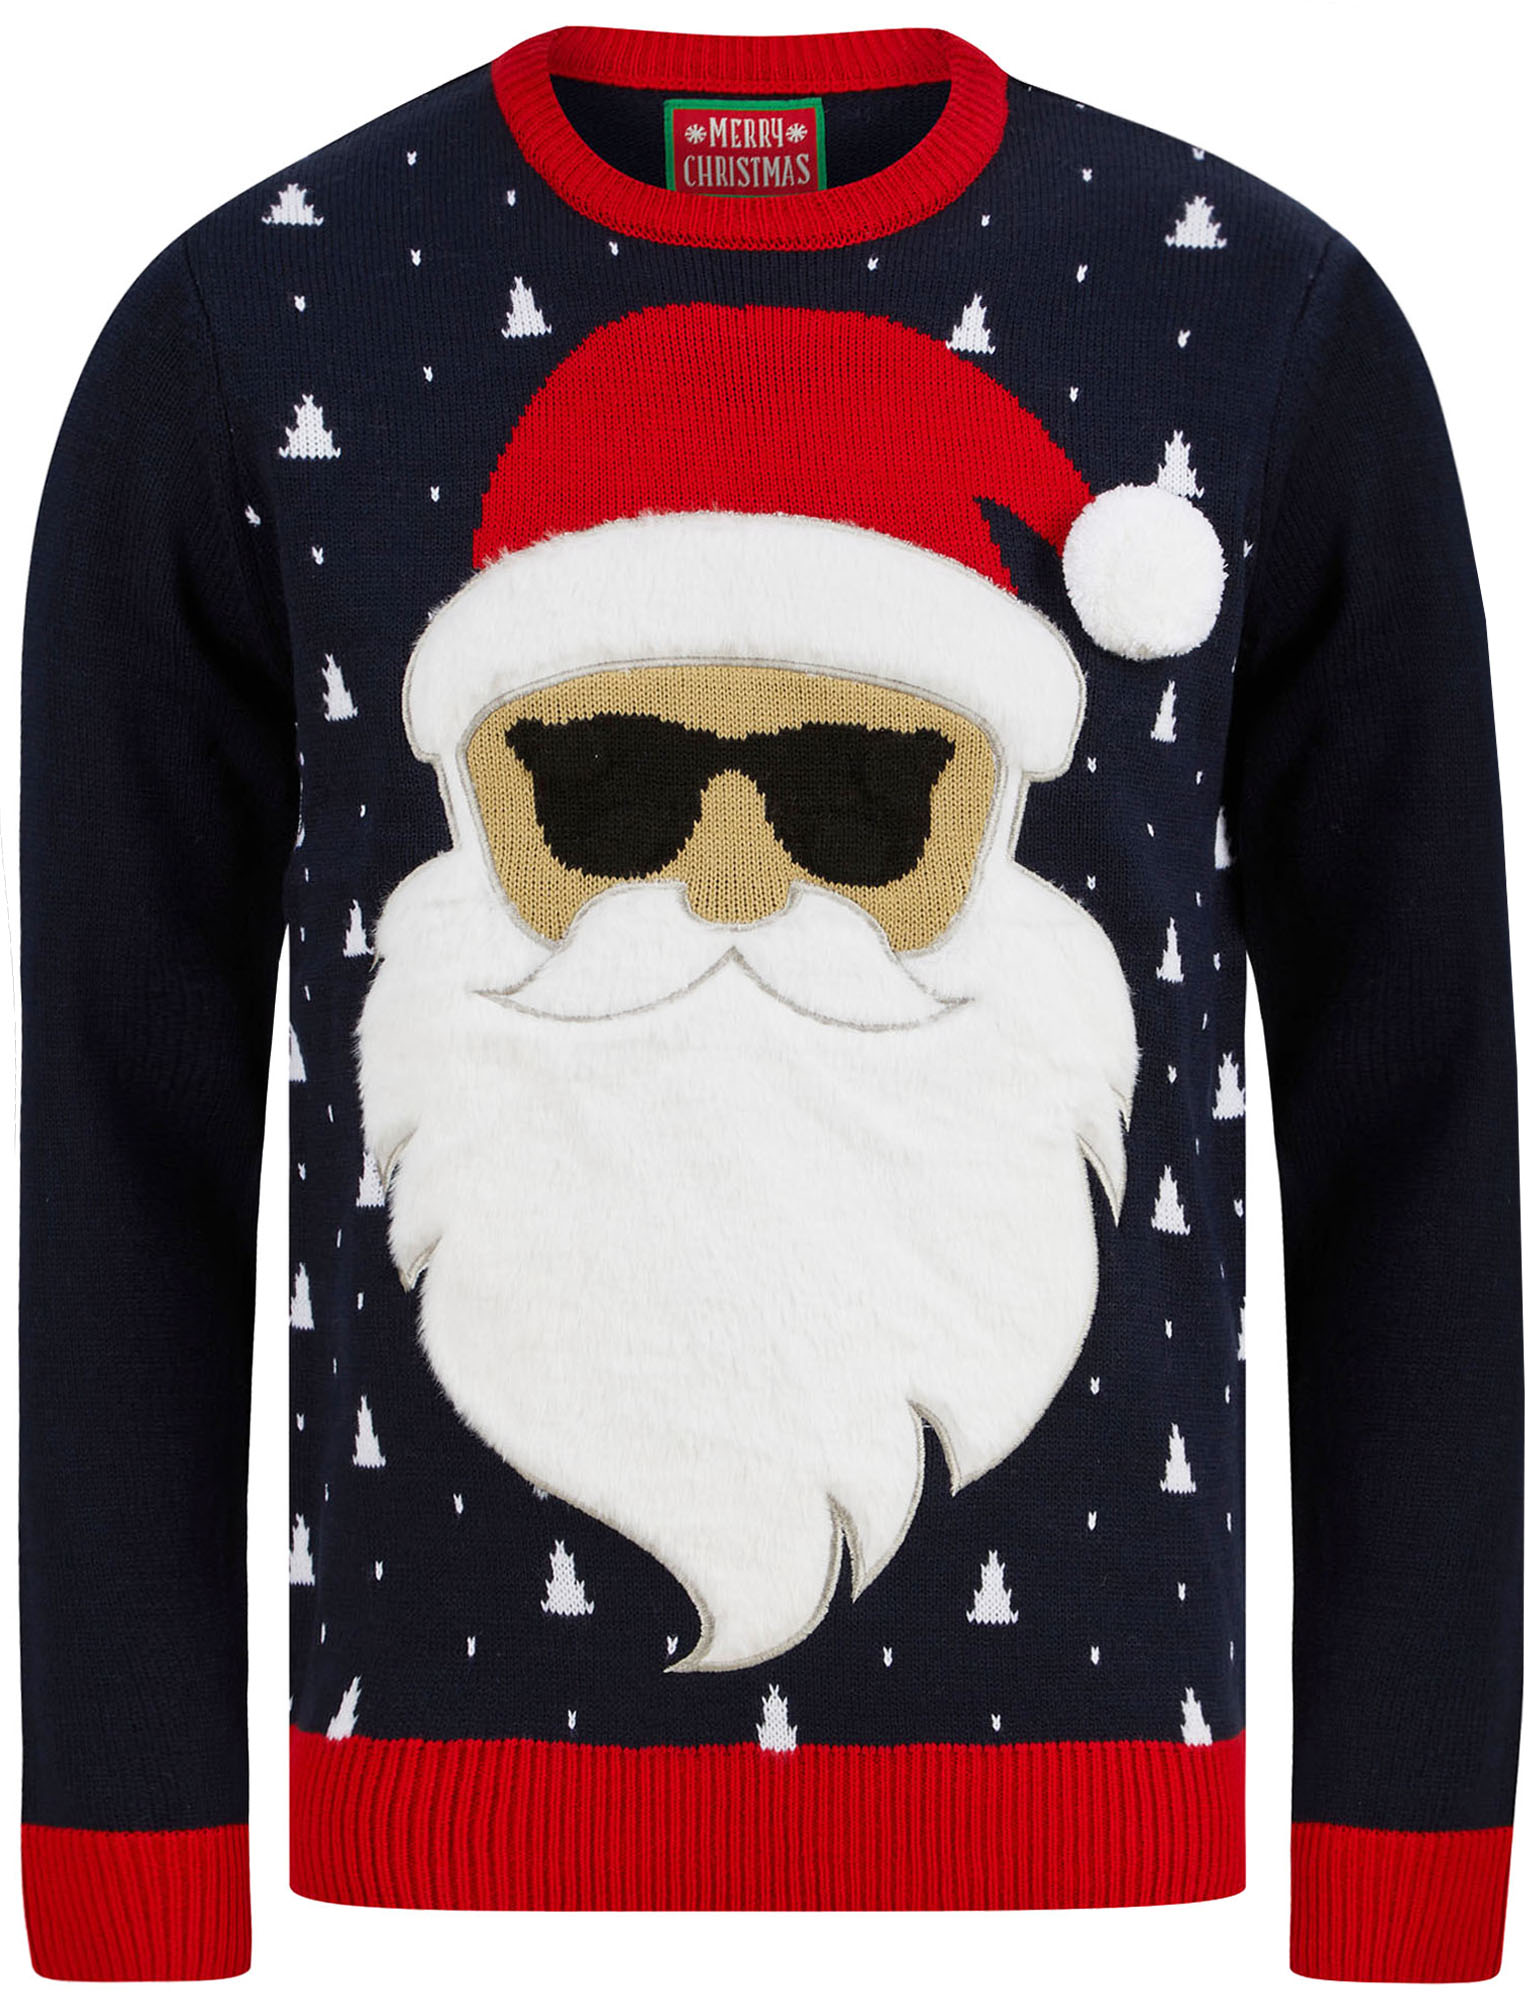 New Men's ABC LIGHT MERRY CHRISTMAS THE UPSIDE DOWN  XMAS Knitted Jumper Sweater 